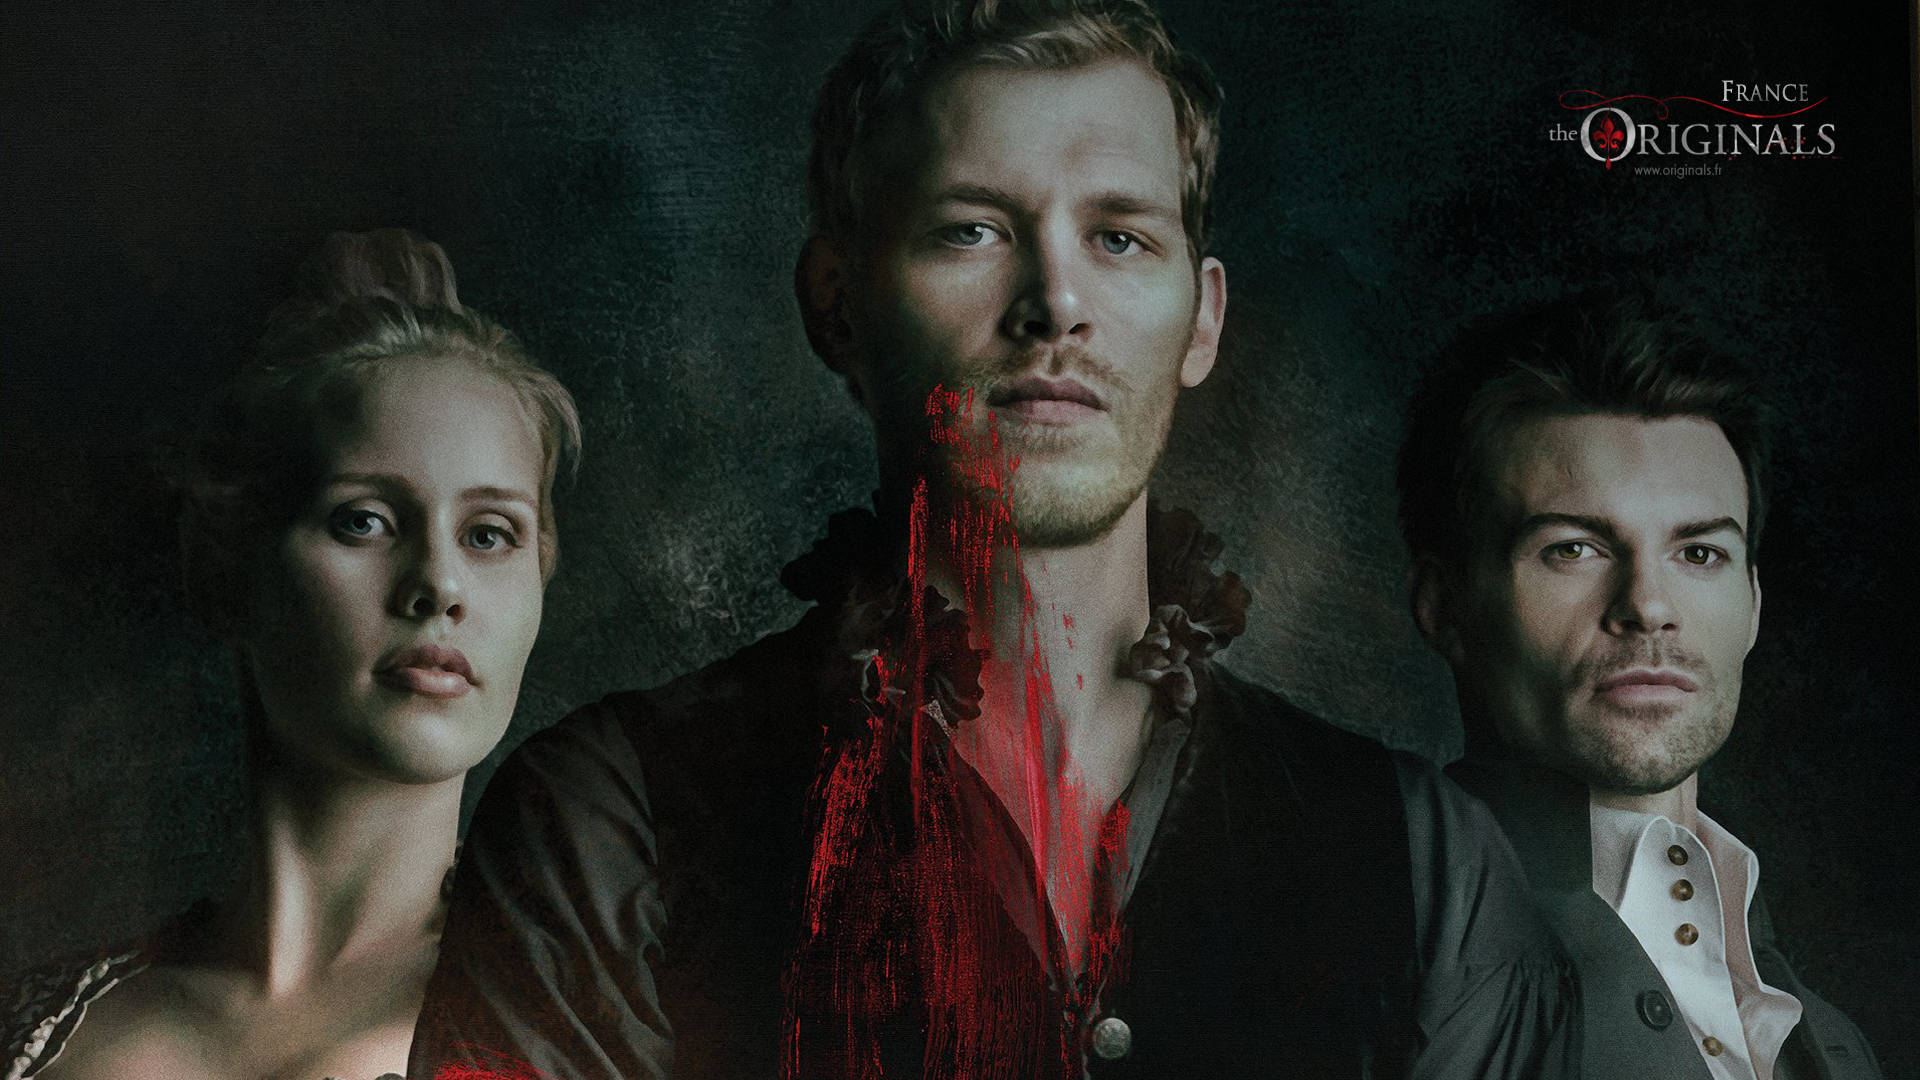 The Originals Mikaelson Siblings Cover Background